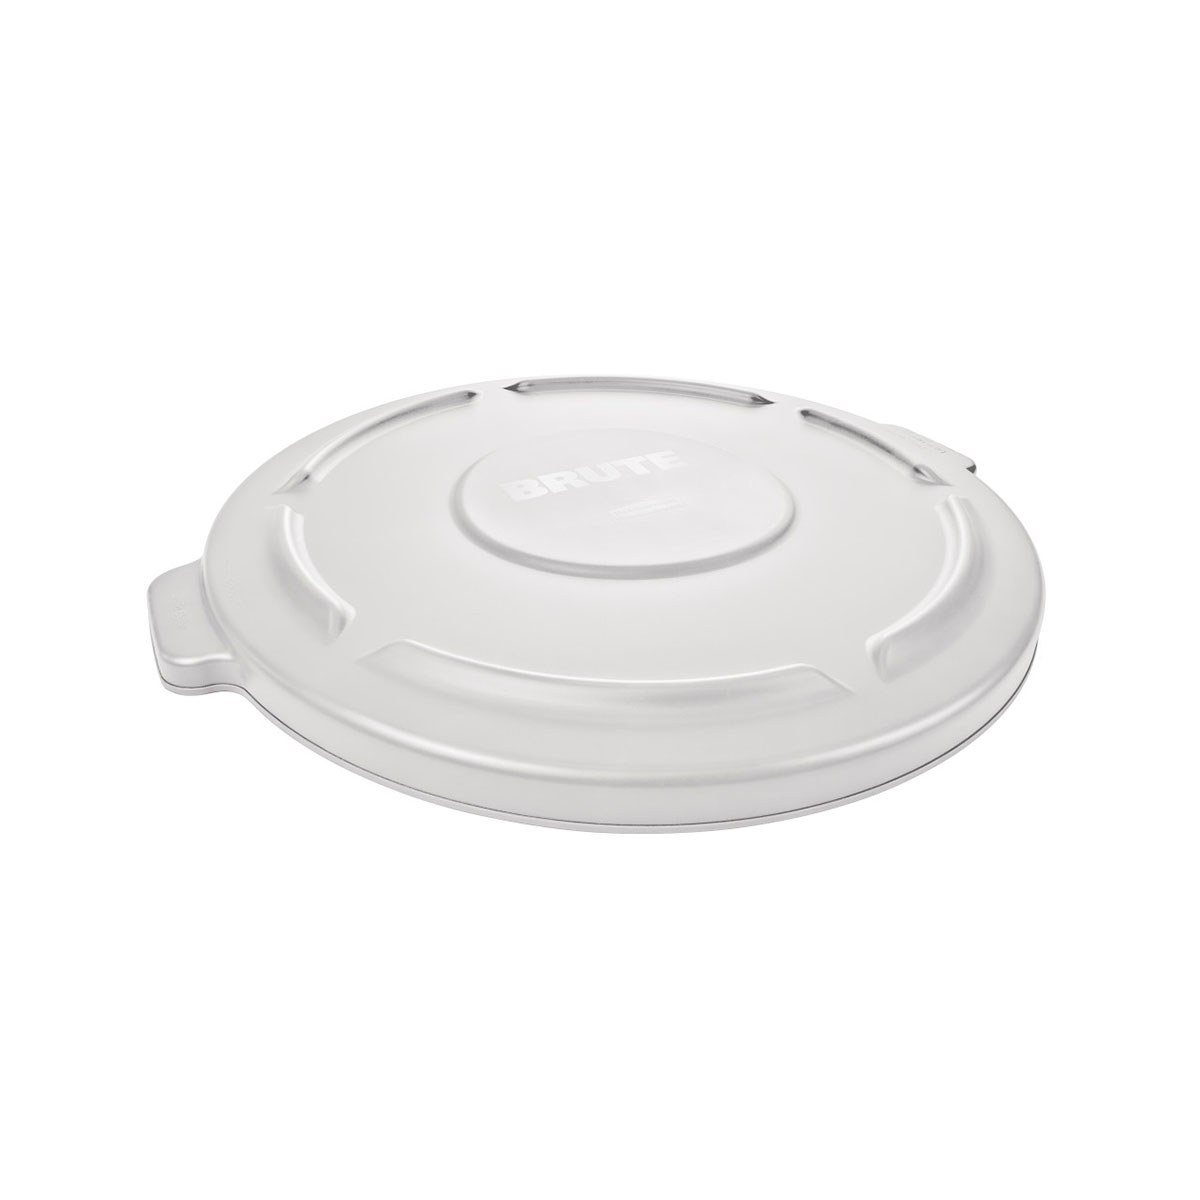 Rubbermaid Rubbermaid FG264560 Lid (Only) for 44-Gallon Round Brute Container # 2643 - White